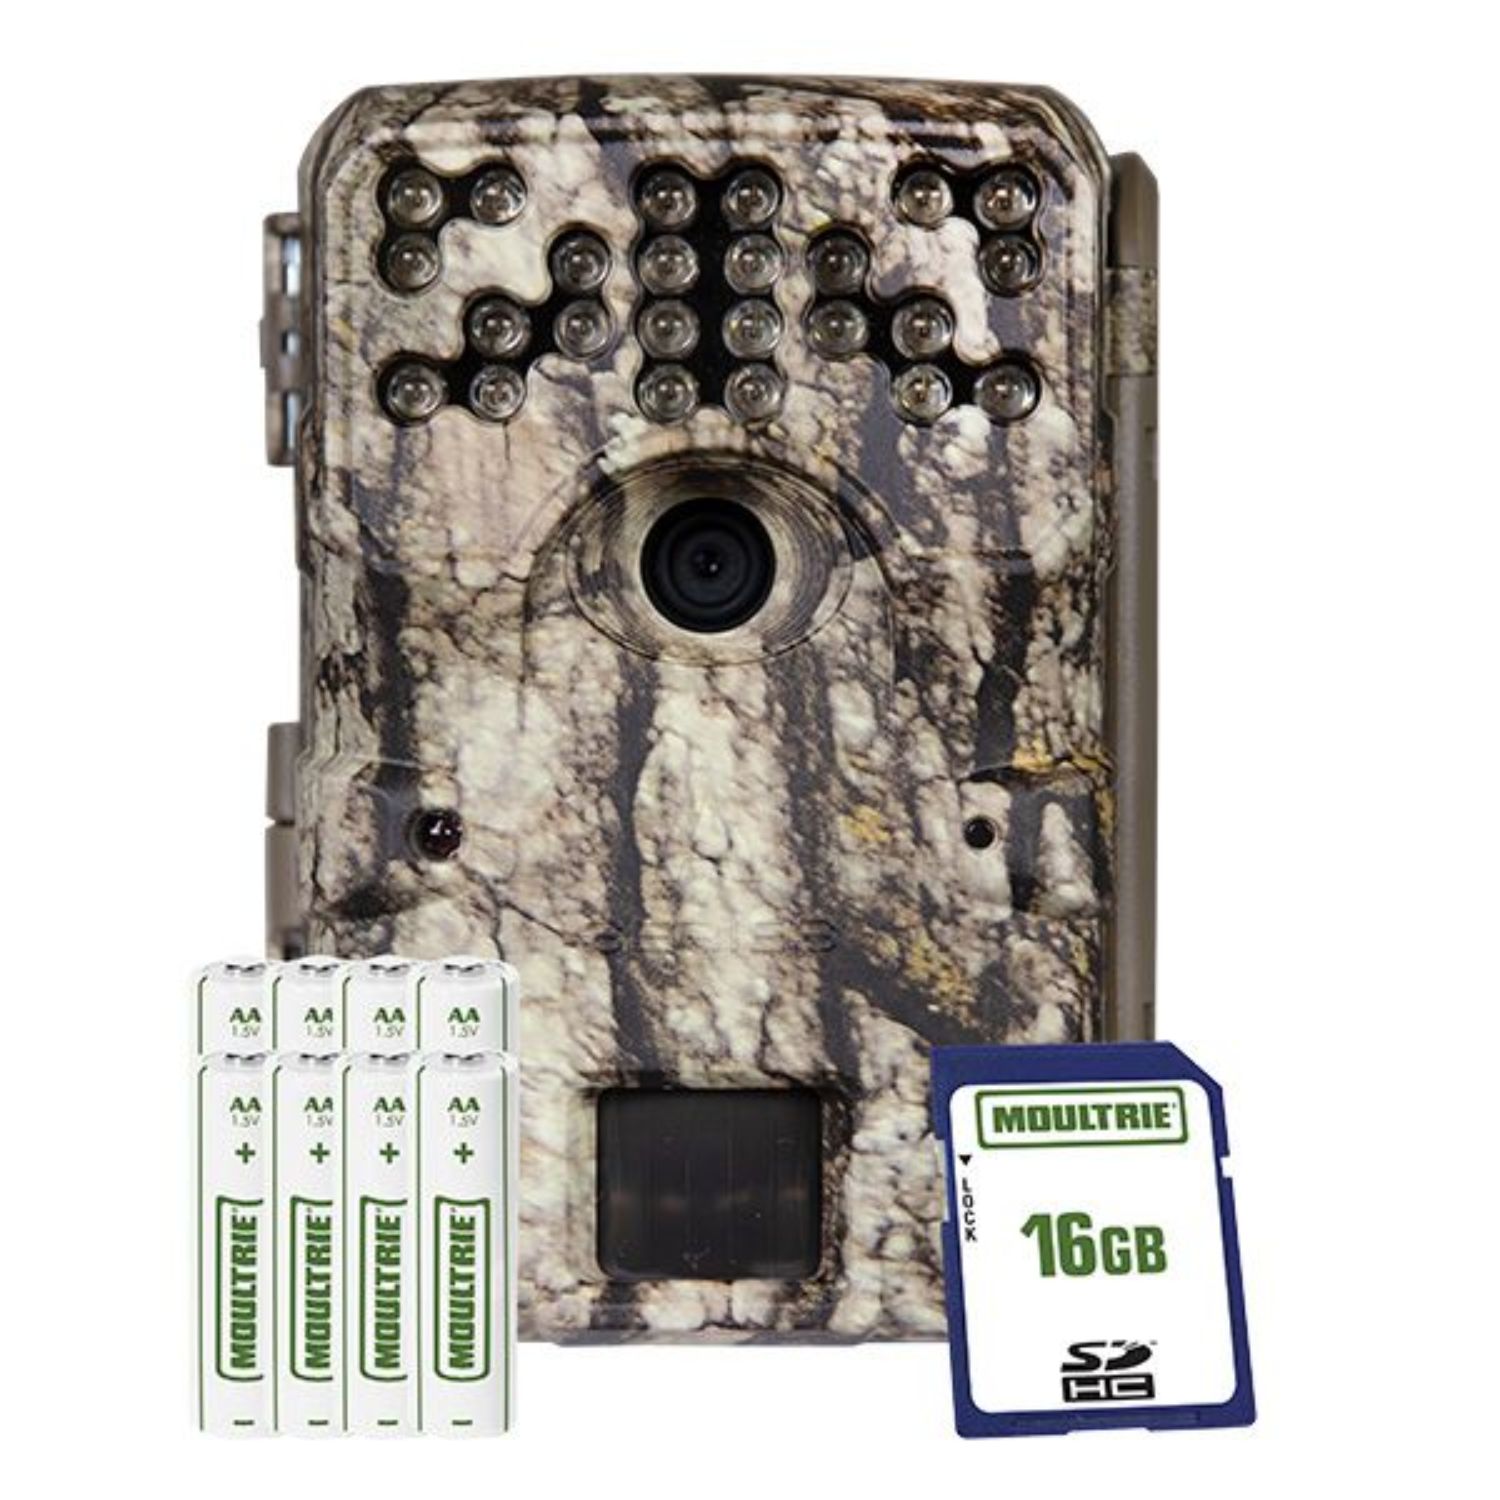 Moultrie A-900 Game Camera Bundle